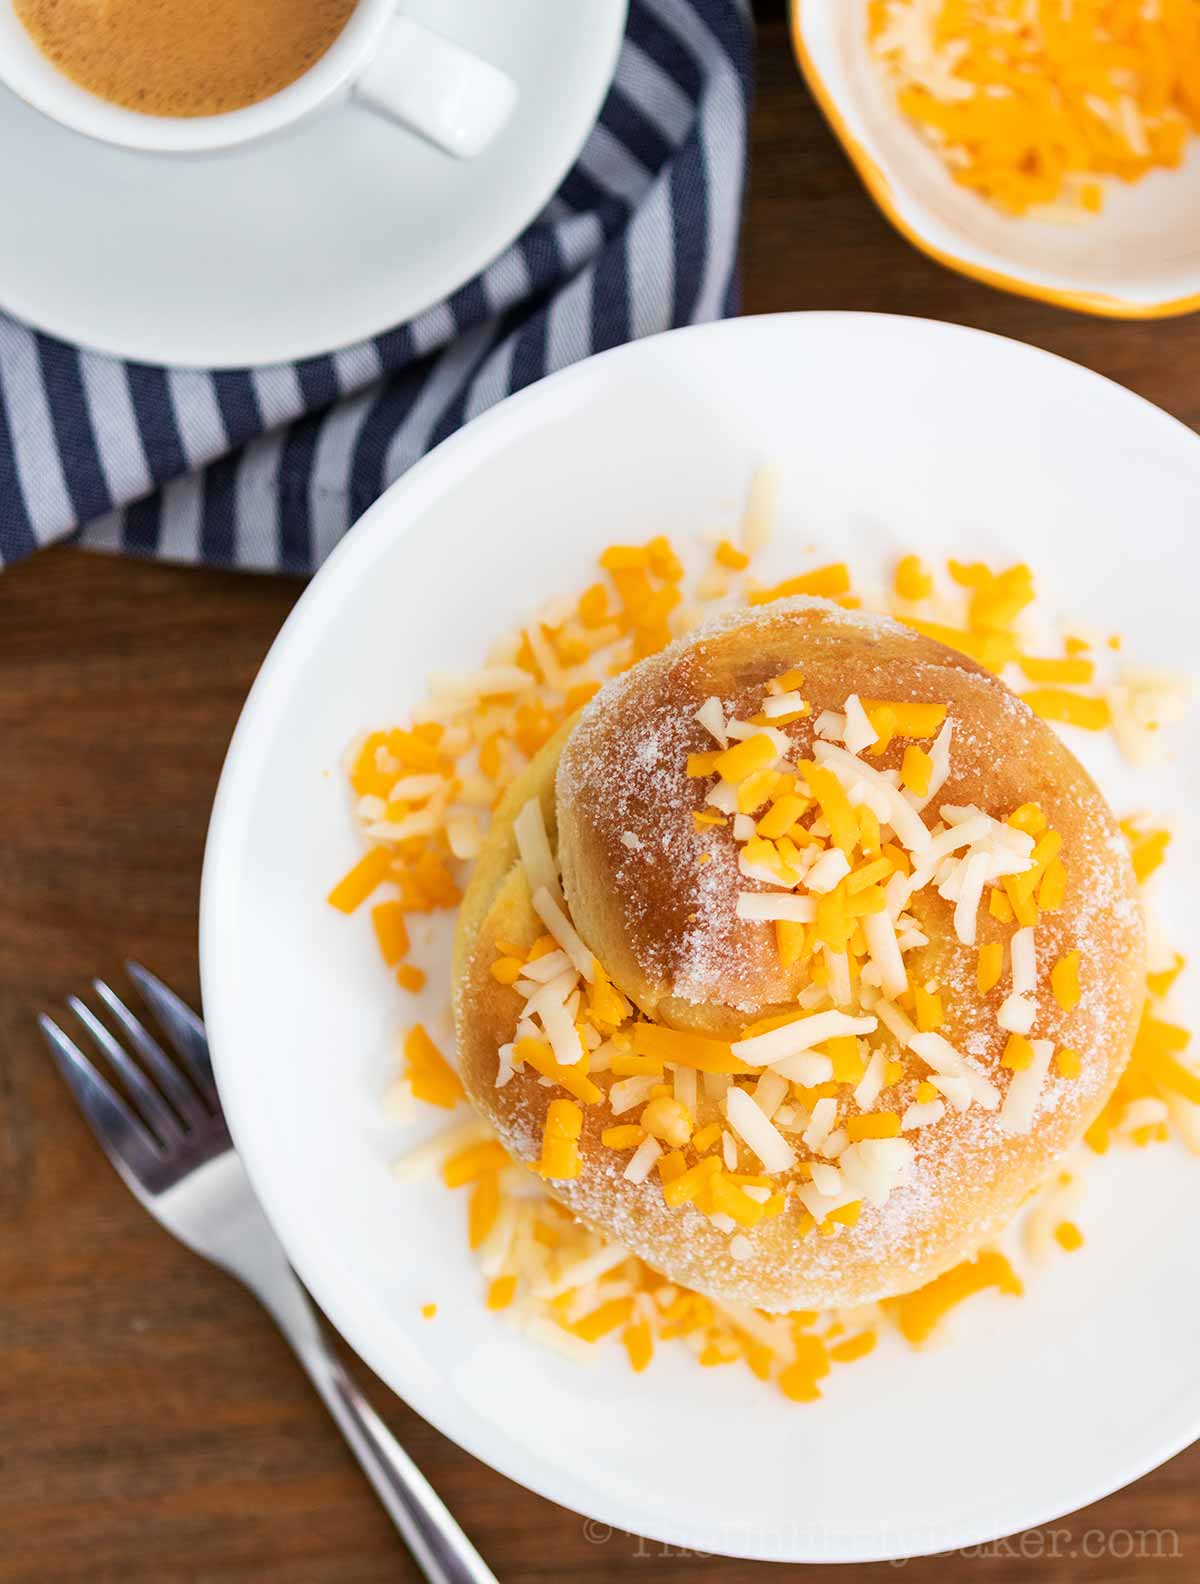 Soft and fluffy ensaymada on a white plate